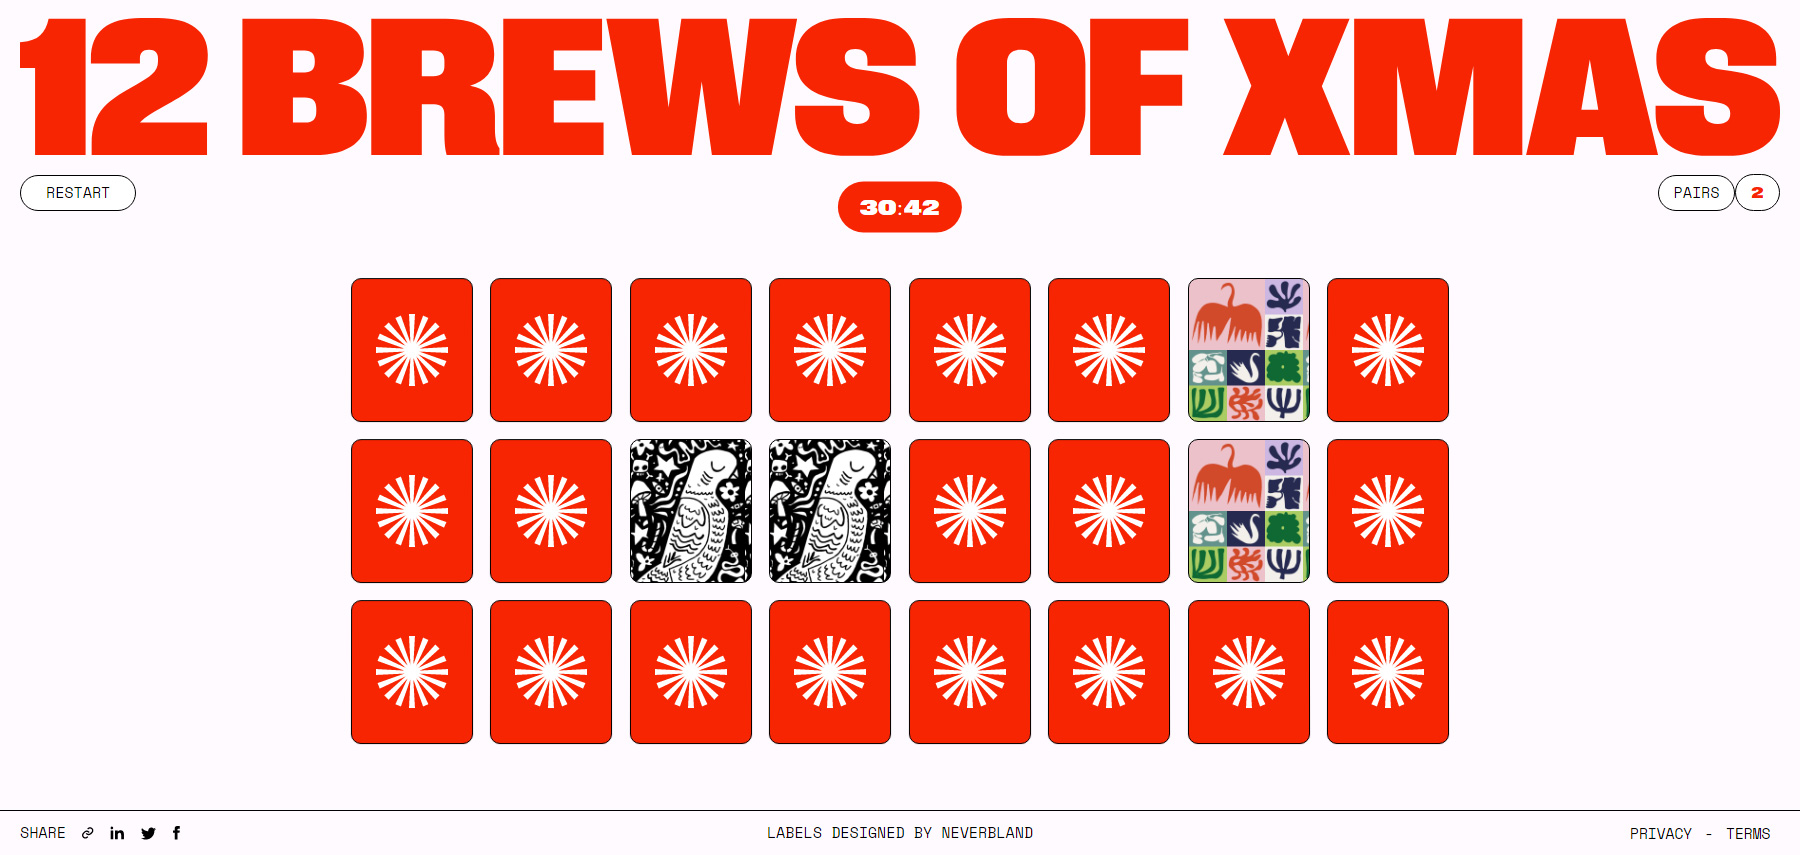 12 BREWS OF XMAS - Website of the Day